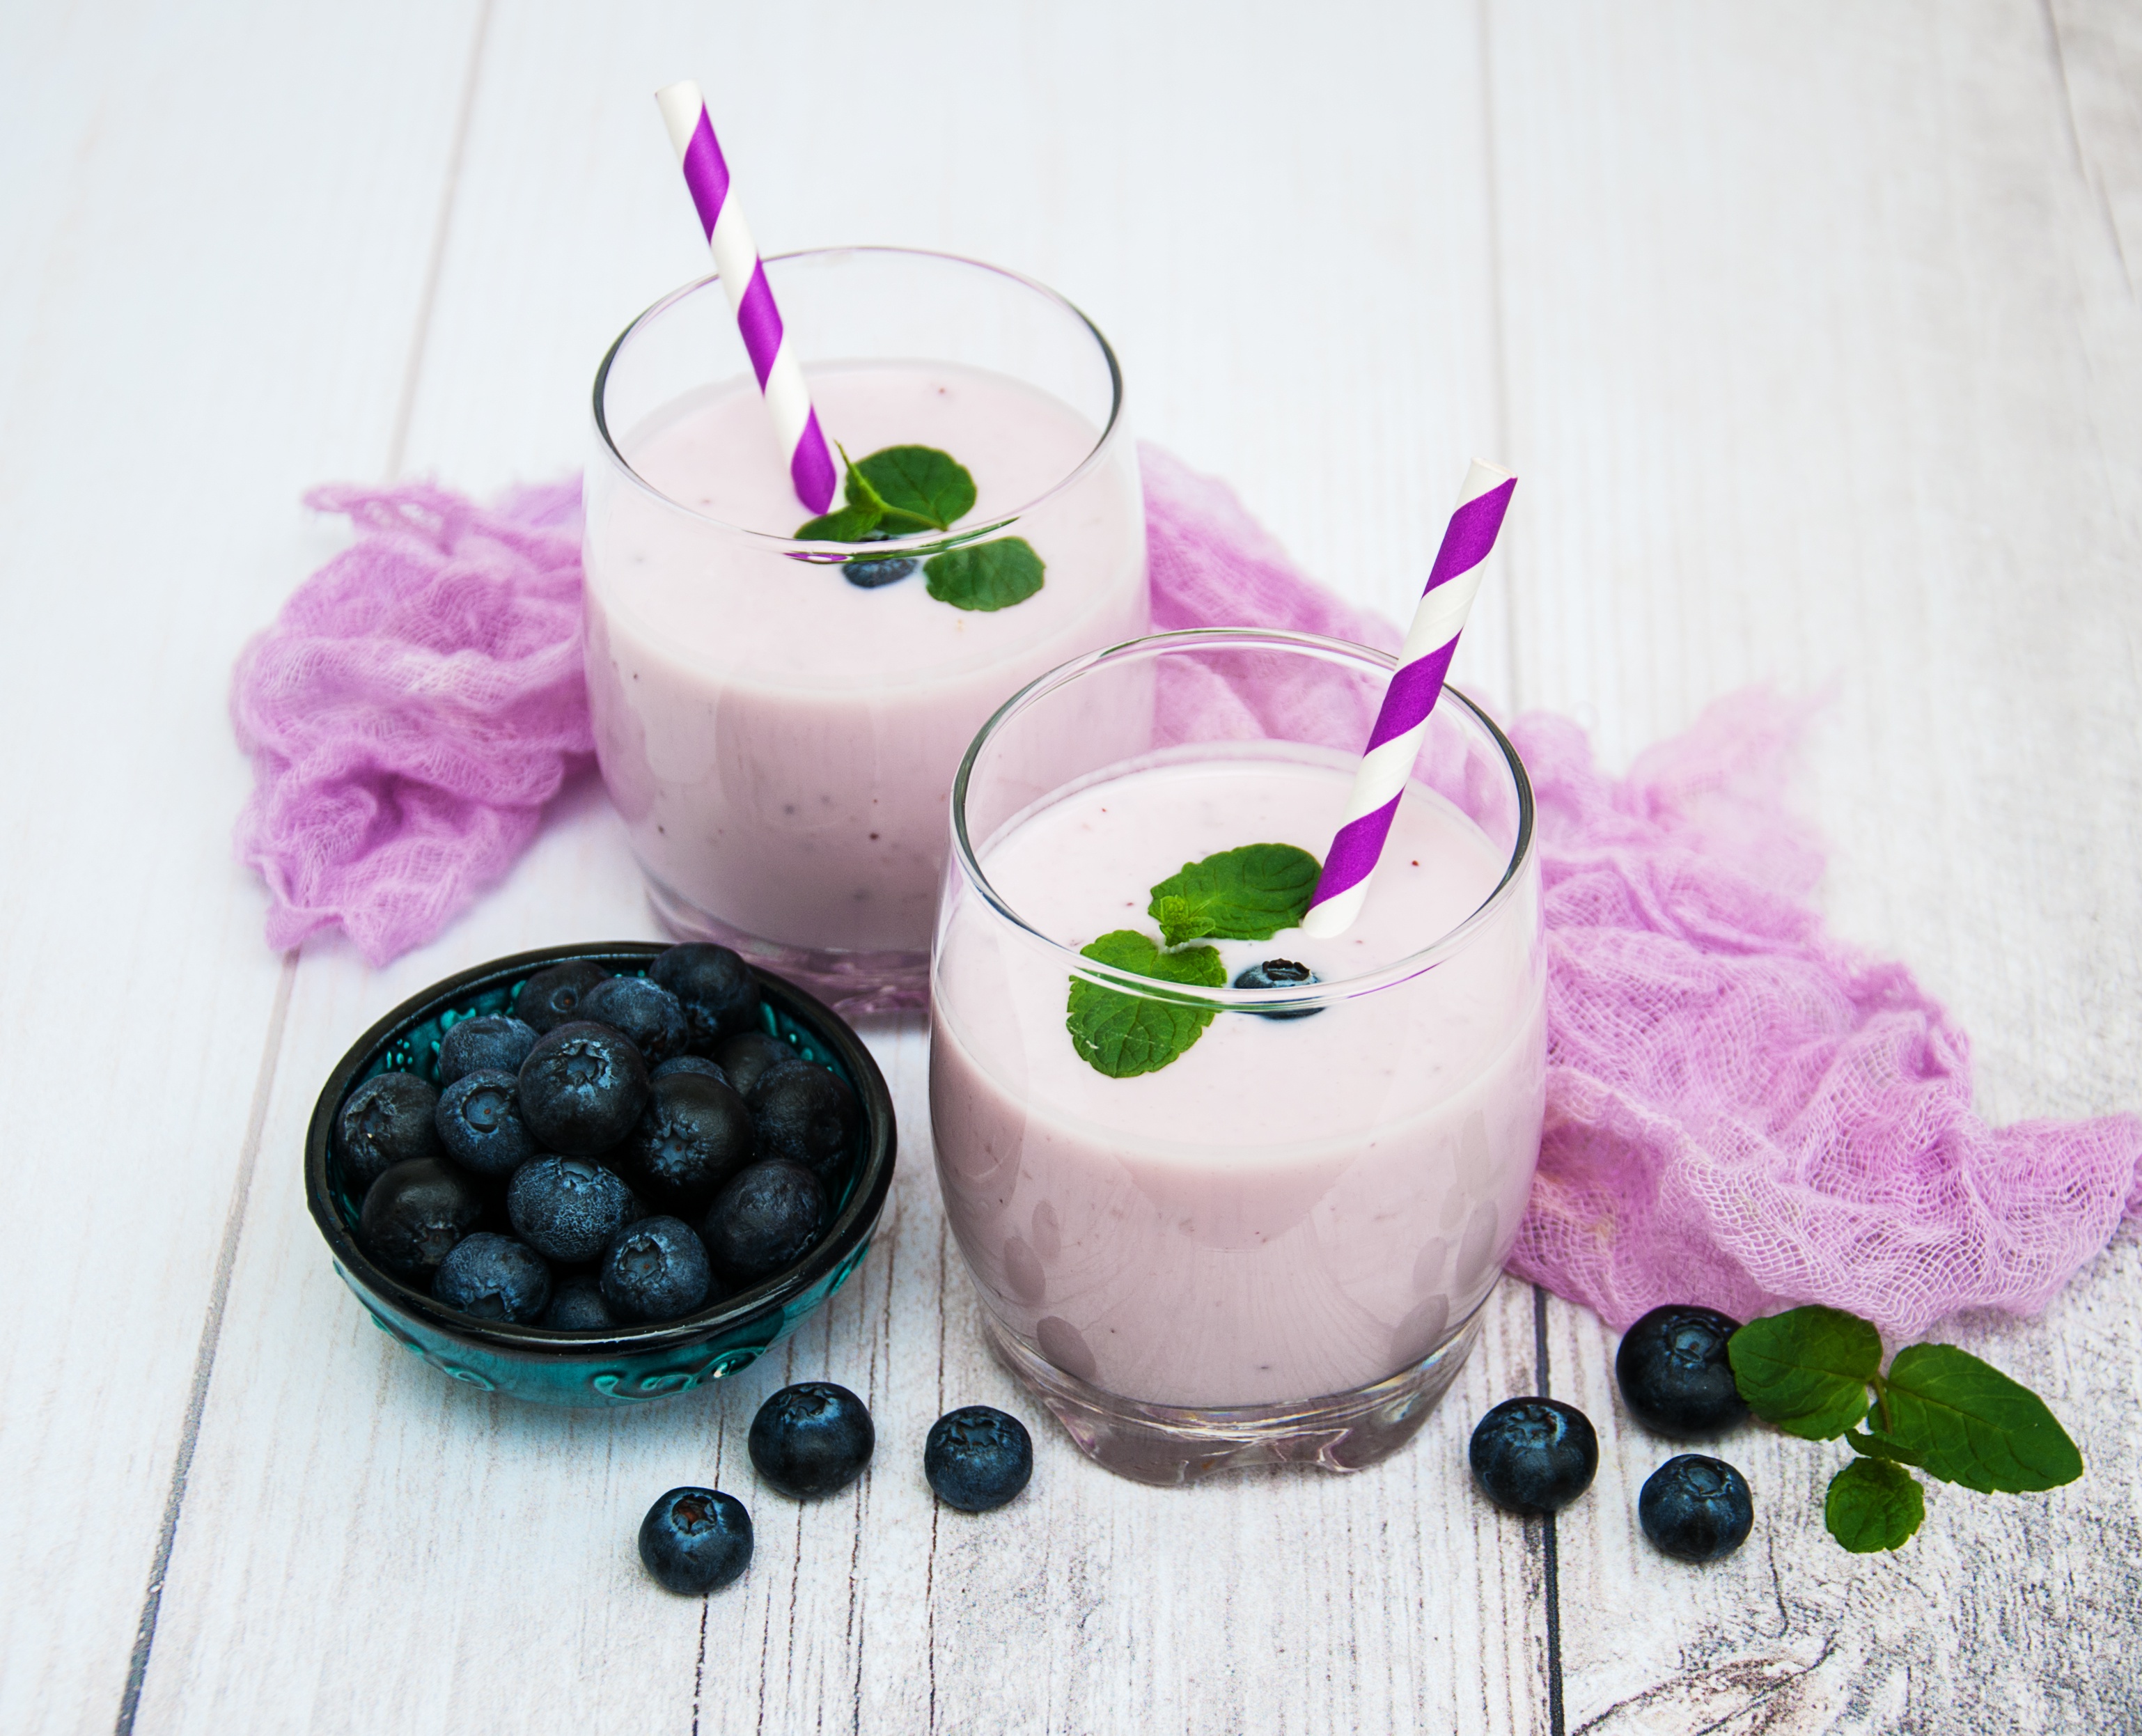 Berry Blueberry Drink Fruit Smoothie Still Life 3076x2493